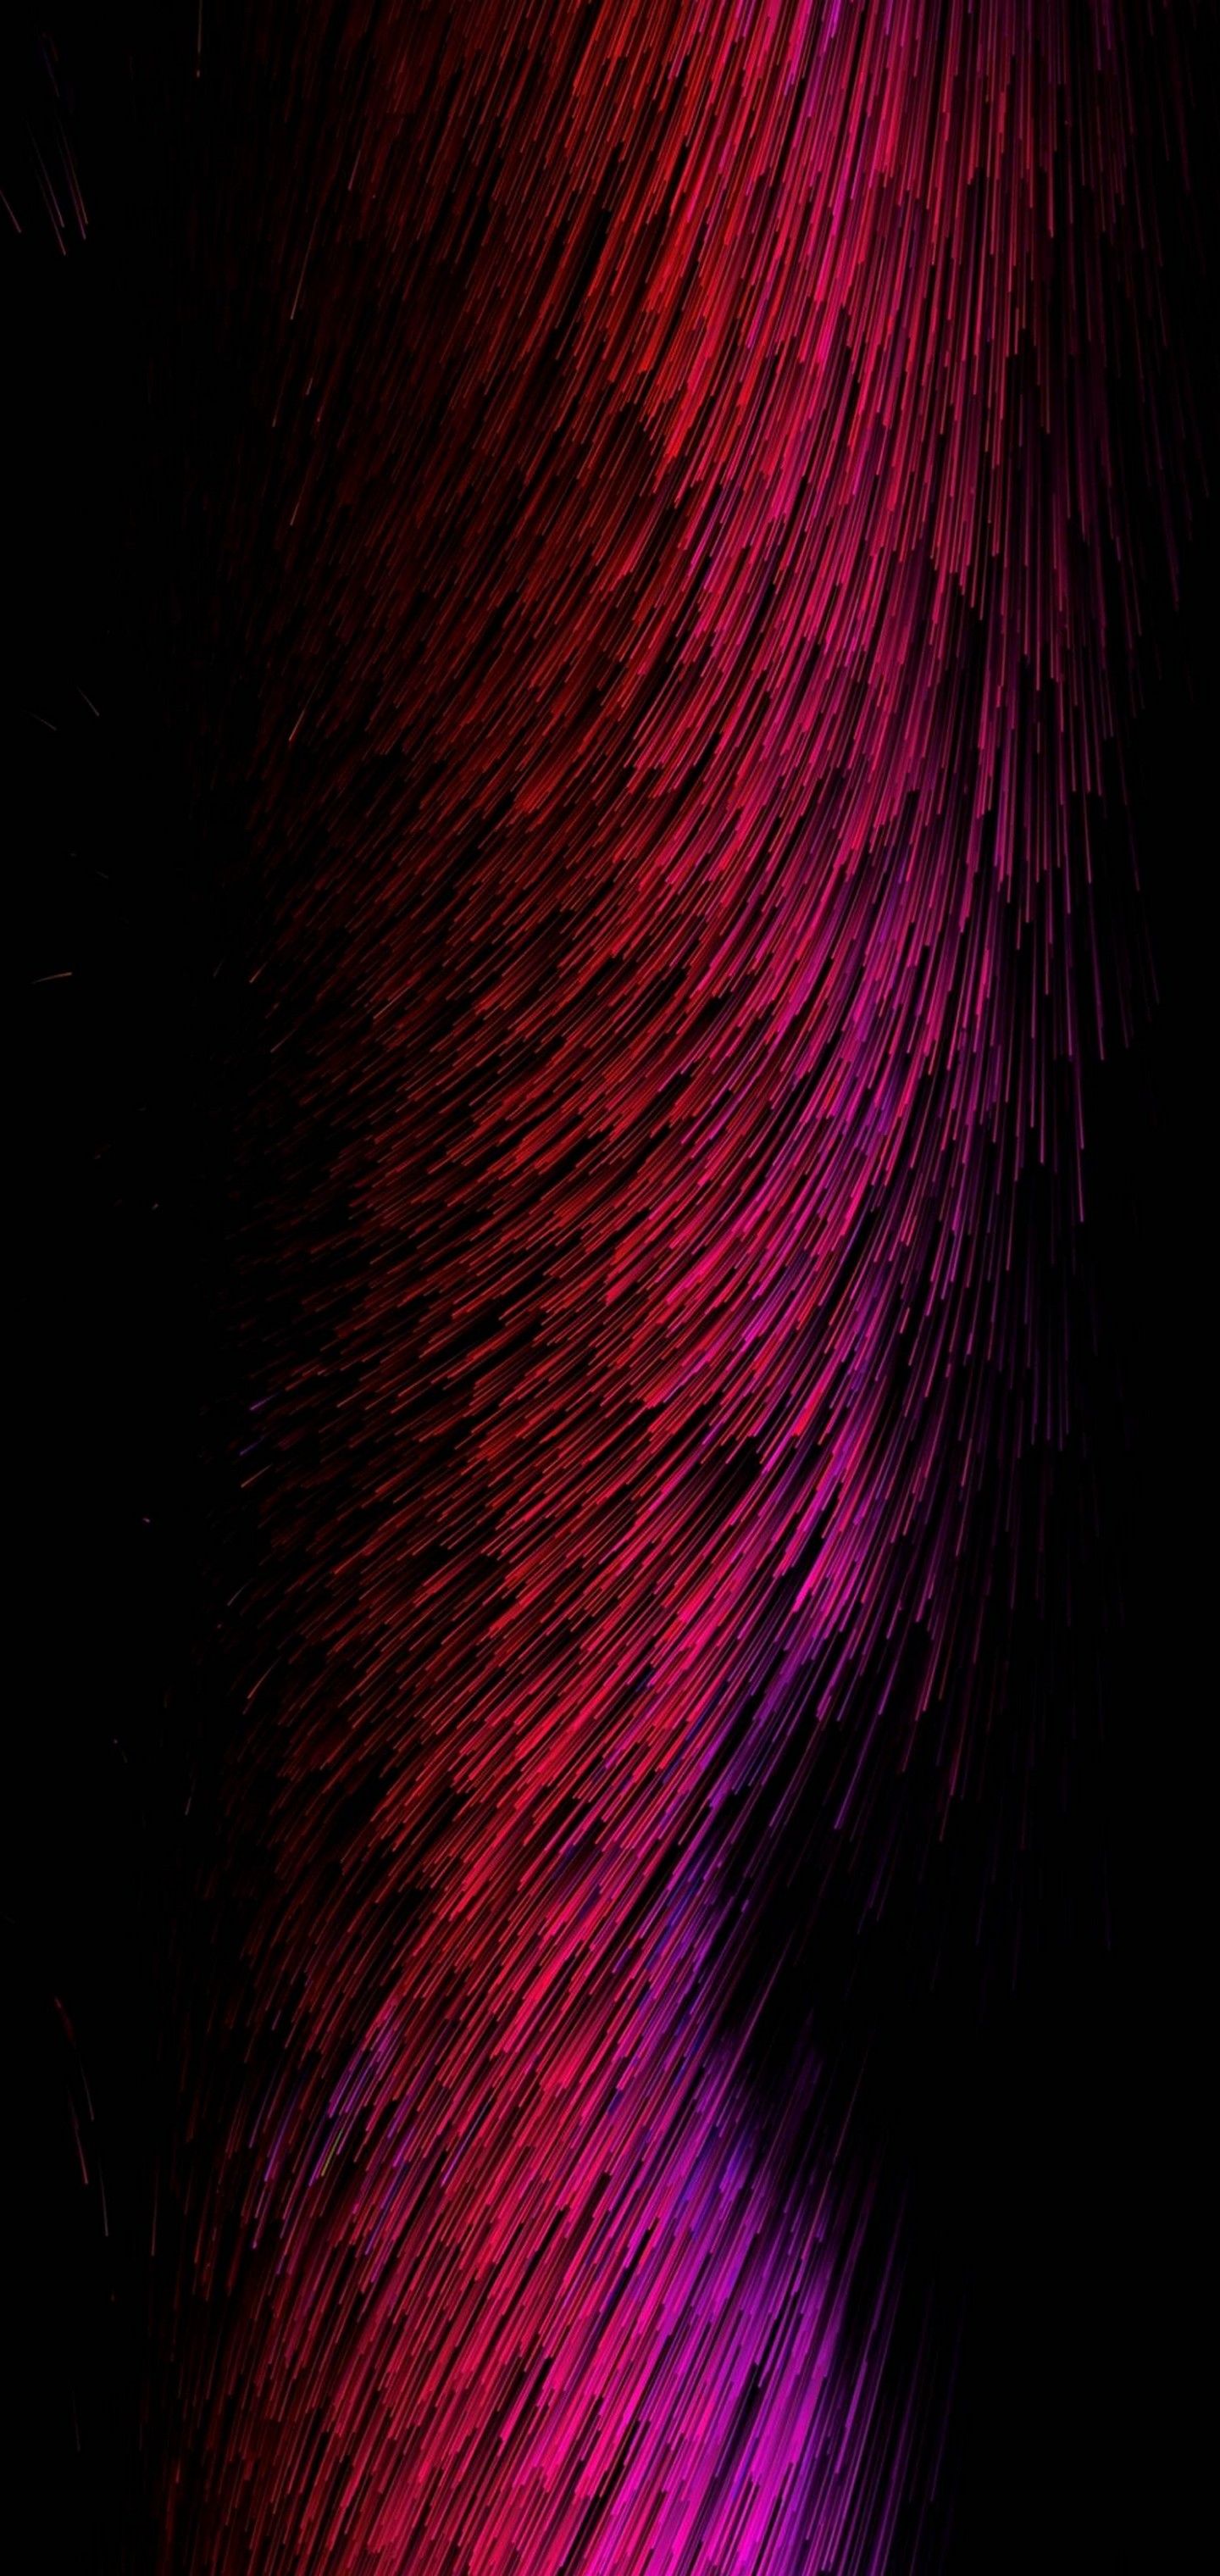 Threads Glow Red Pink Abstract Wallpaper